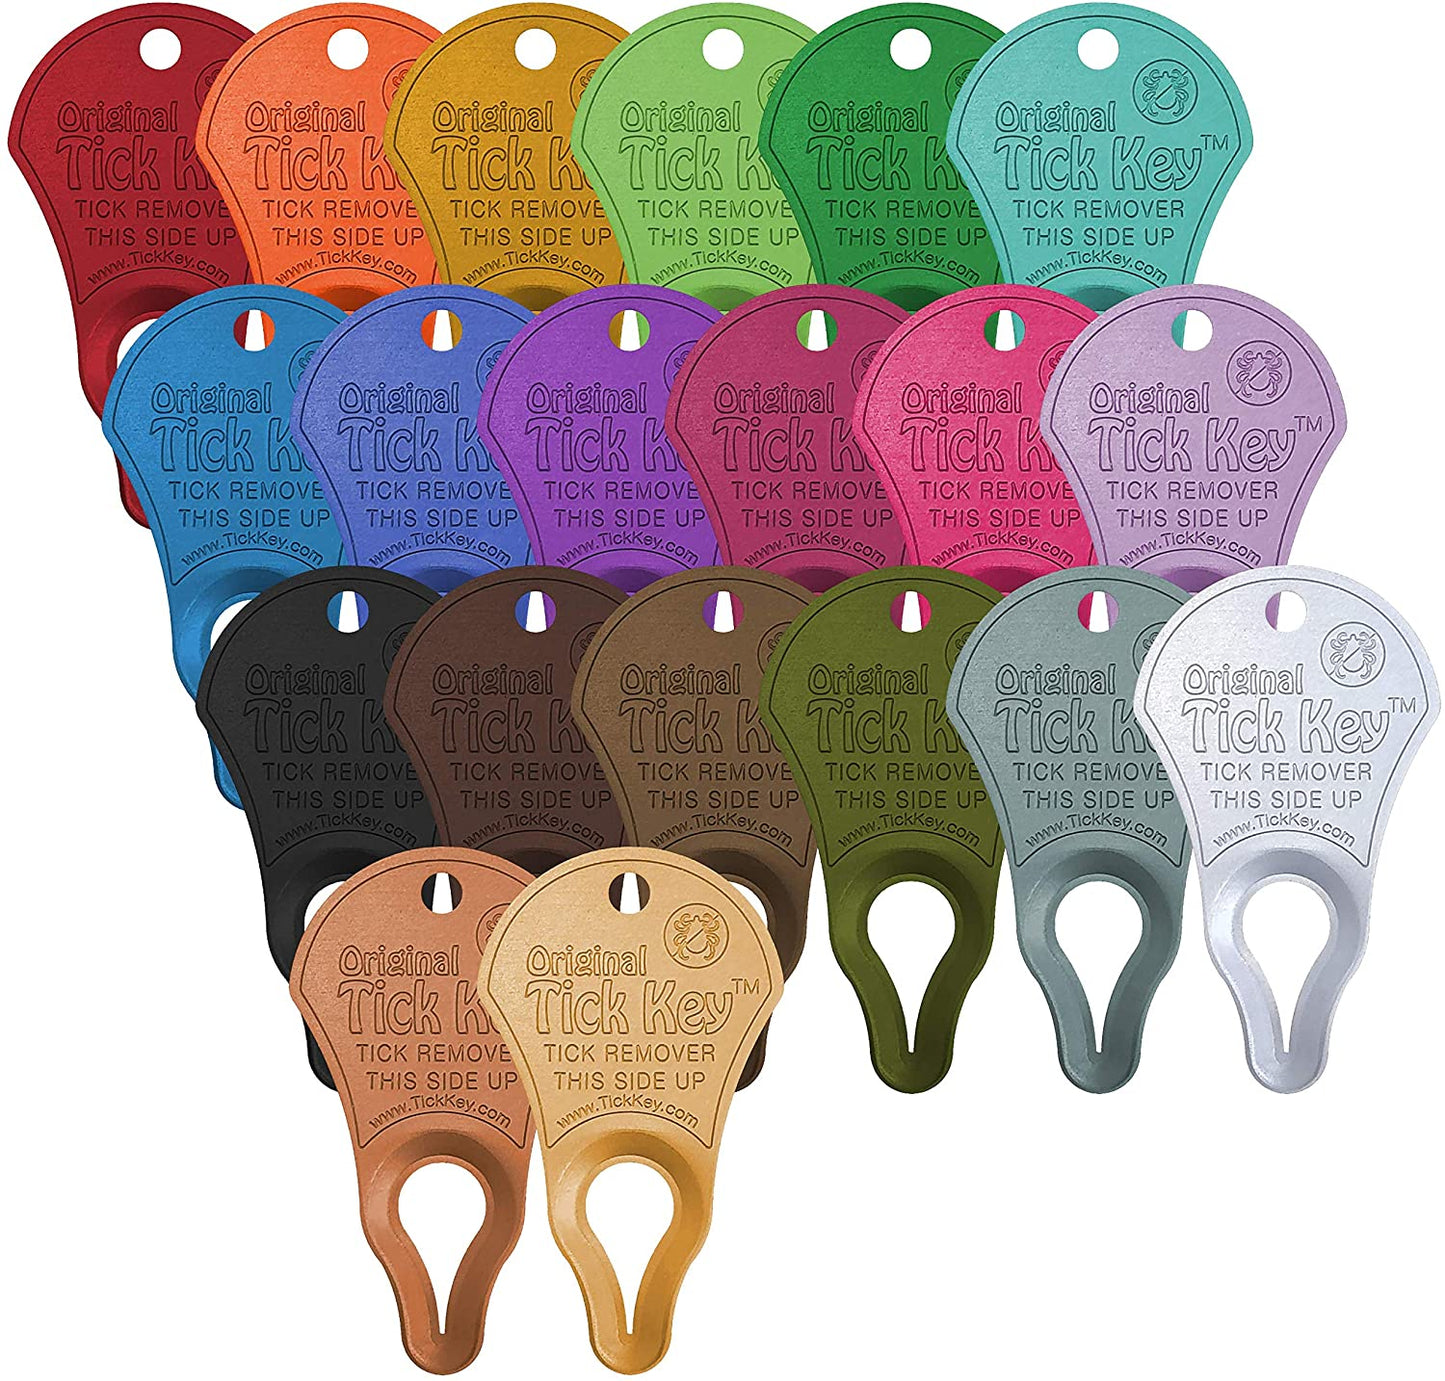 Original Tick Key for Tick Removal 3 Pack (Multi Color) - (For 8 piece(s))